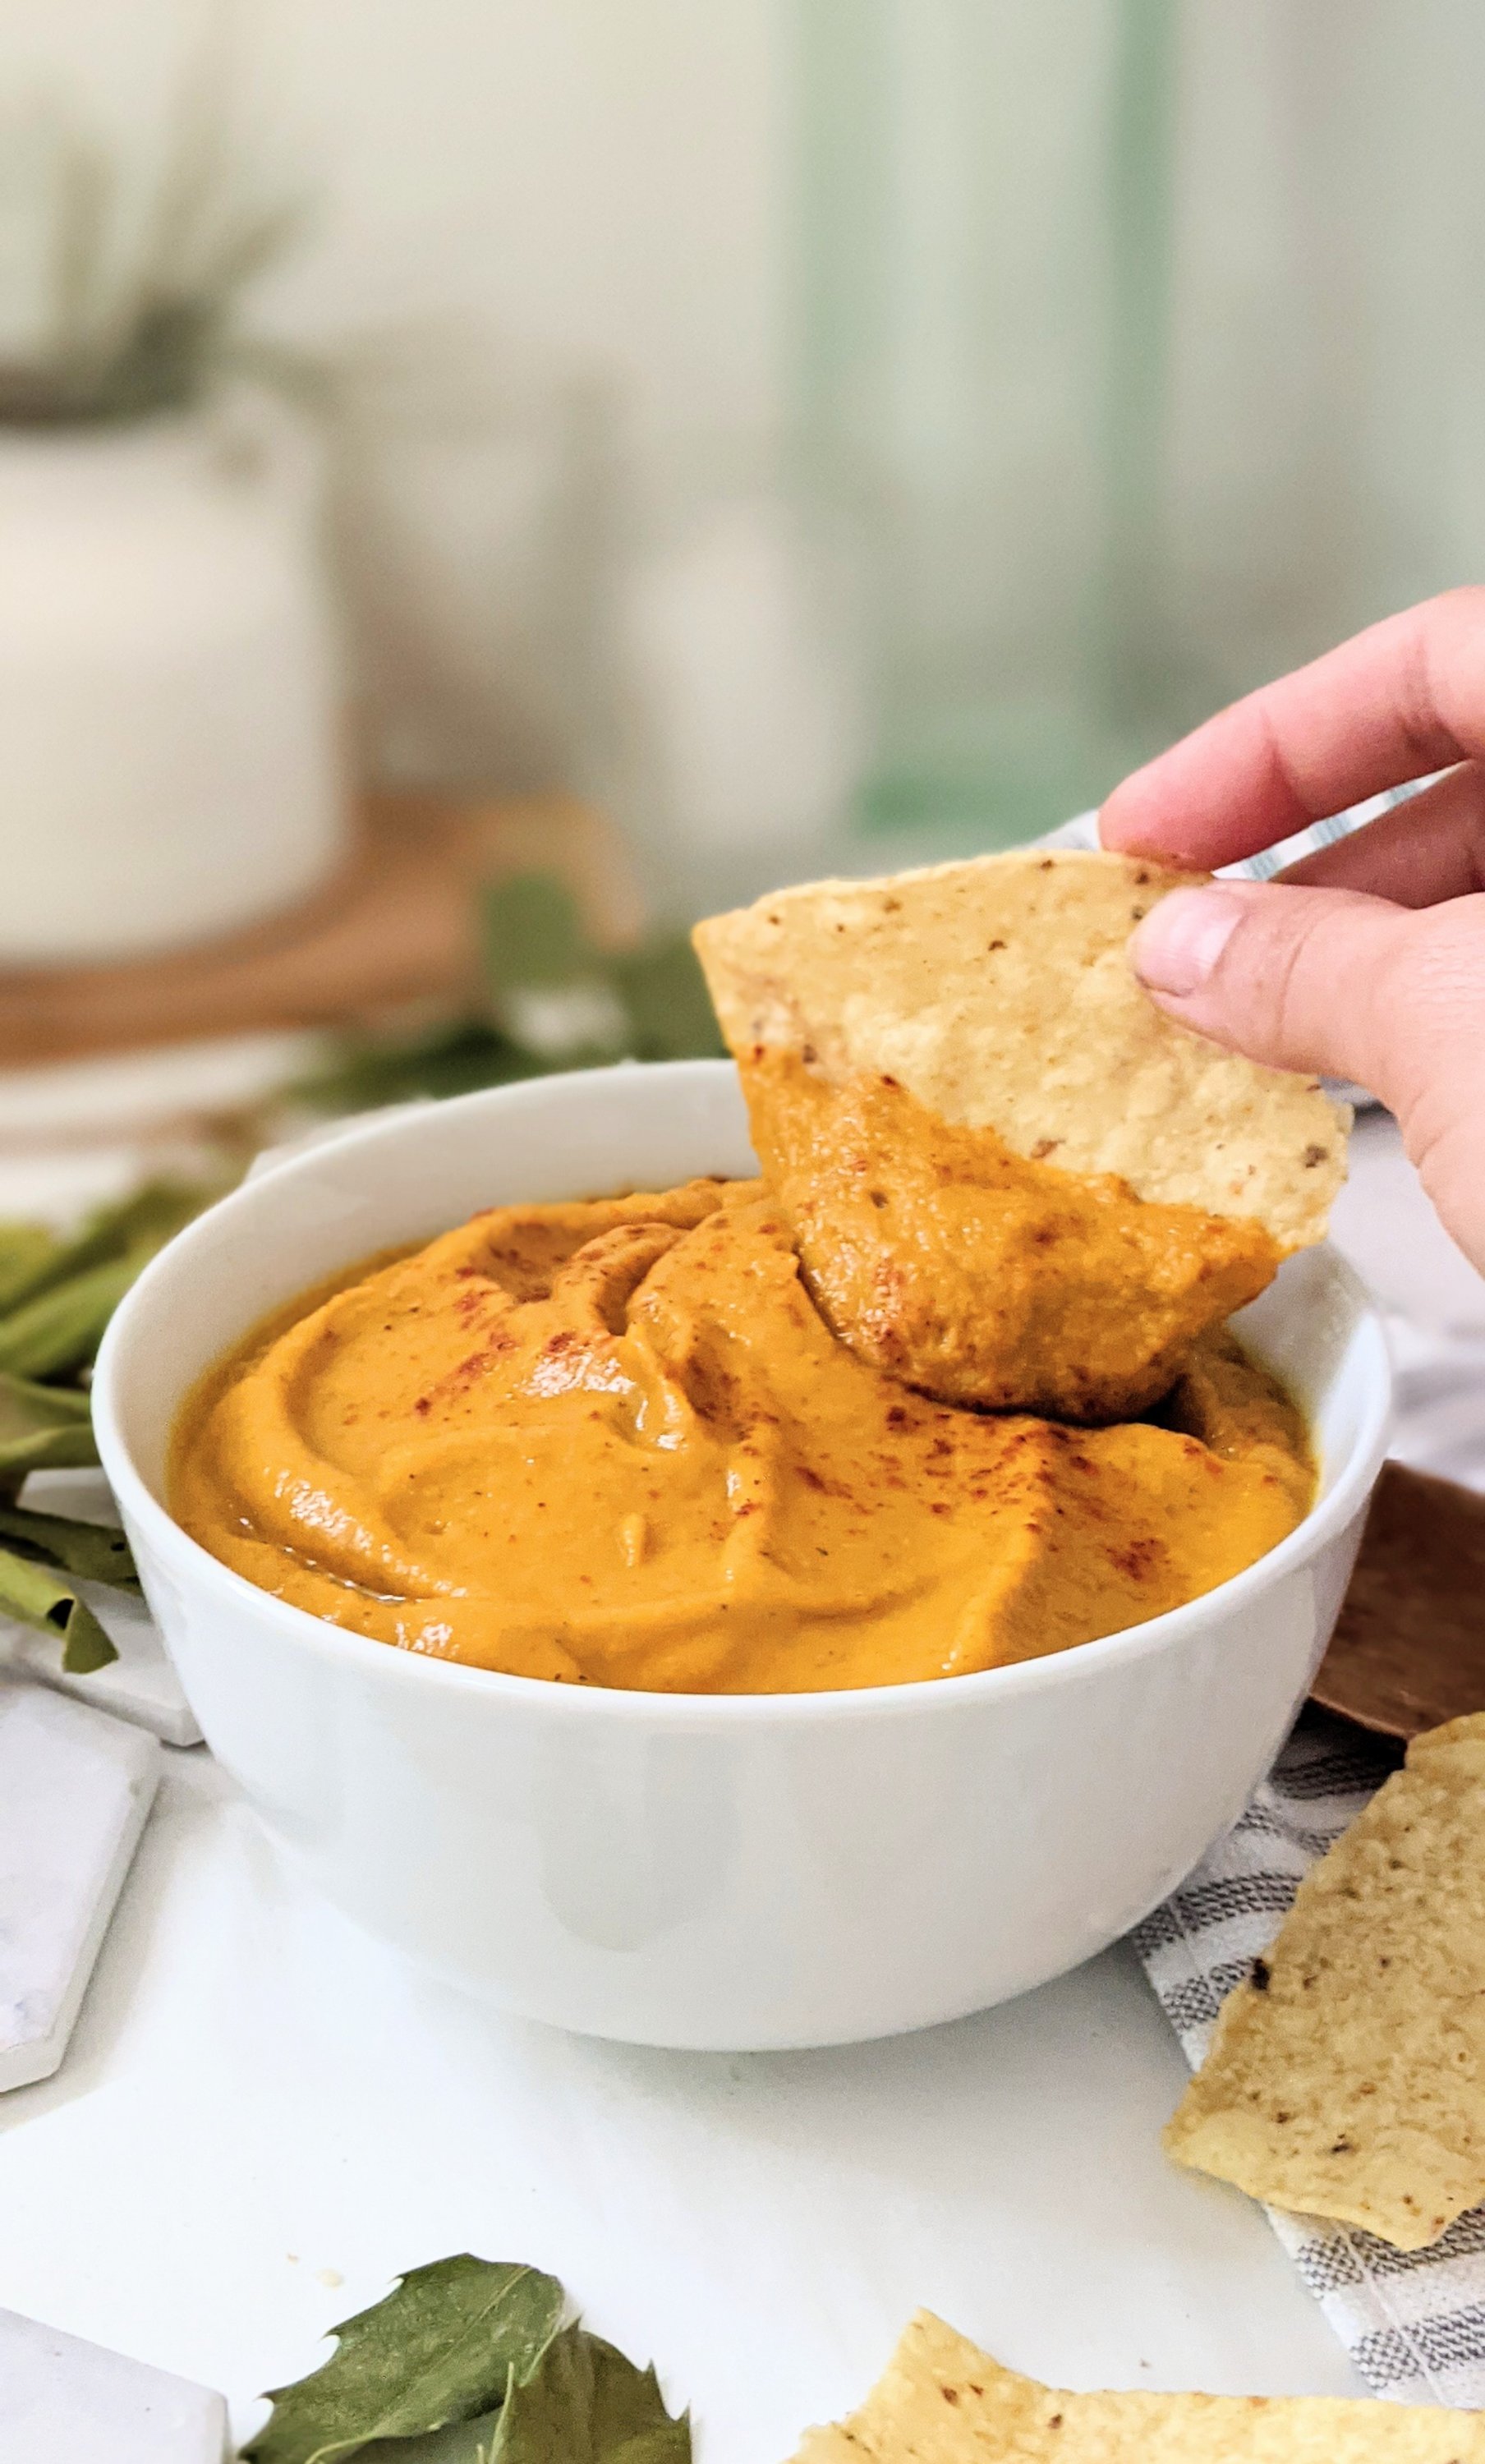 vegan cheeze sauce no nuts recipe healthy nut free cheese sauce vegan dairy free cheese sauce recipe plant based sauce with cheese nacho cheese vegan gluten free